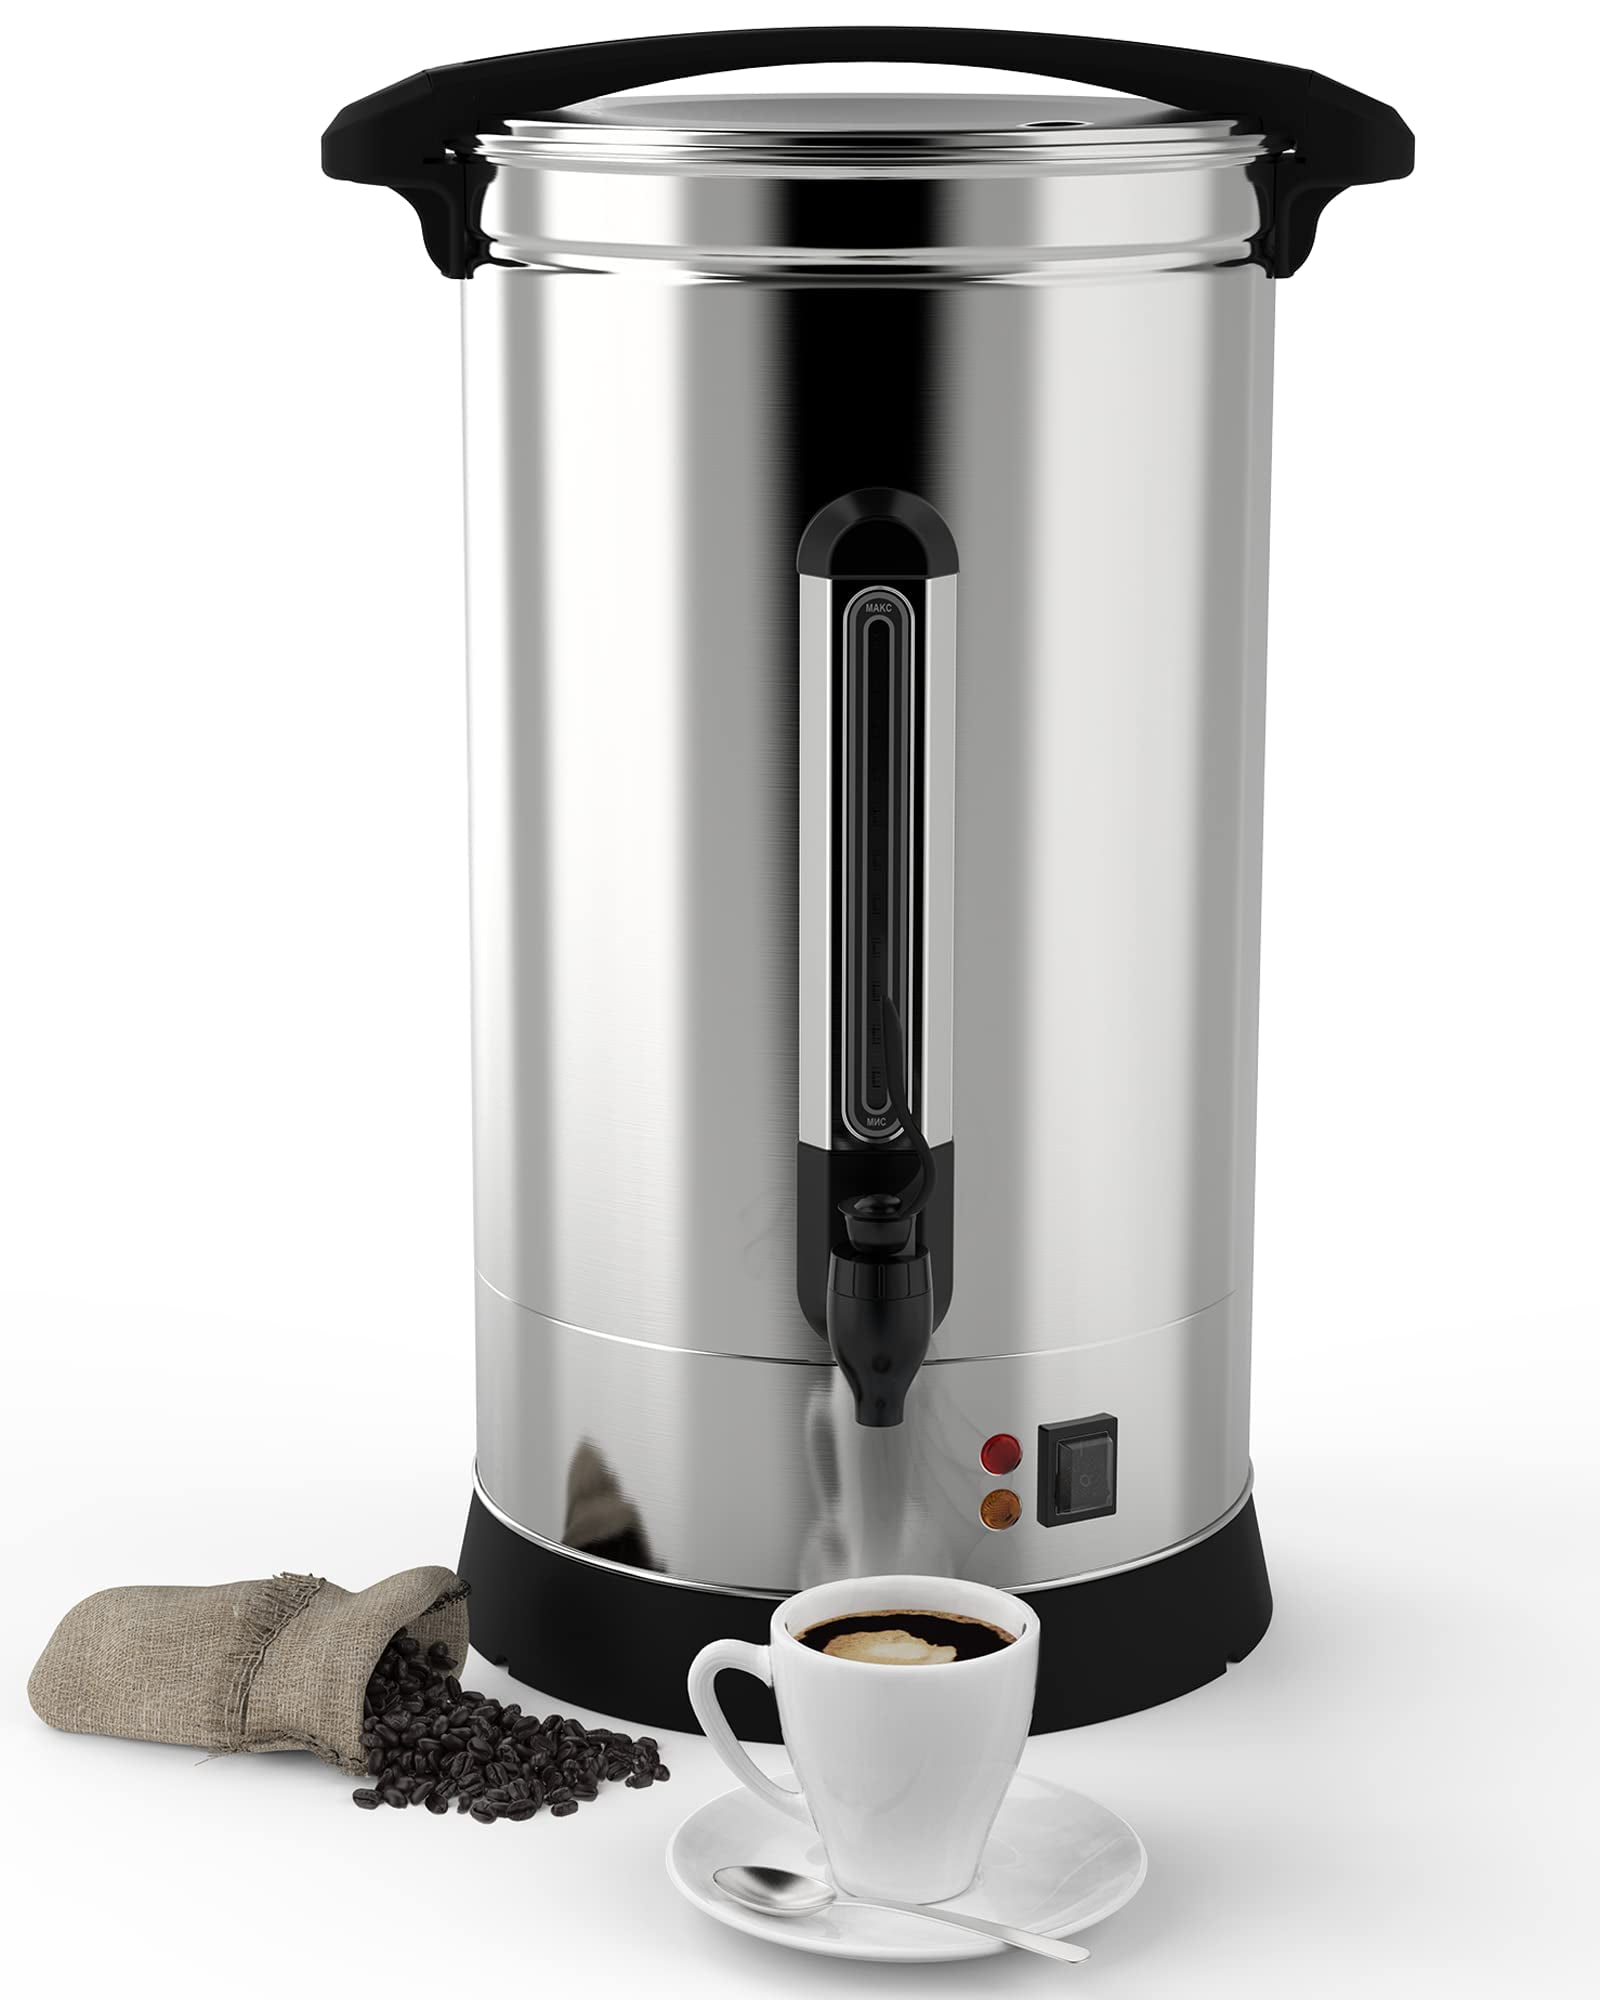 Fooikos Coffee Urn,10 Liters 60 Cups-Premium 304 Stainless  Steel, Large Coffee Dispenser for Quick Brewing, Commercial Percolating Urn  For Party-with Water Level Indicator Display: Coffee Urns